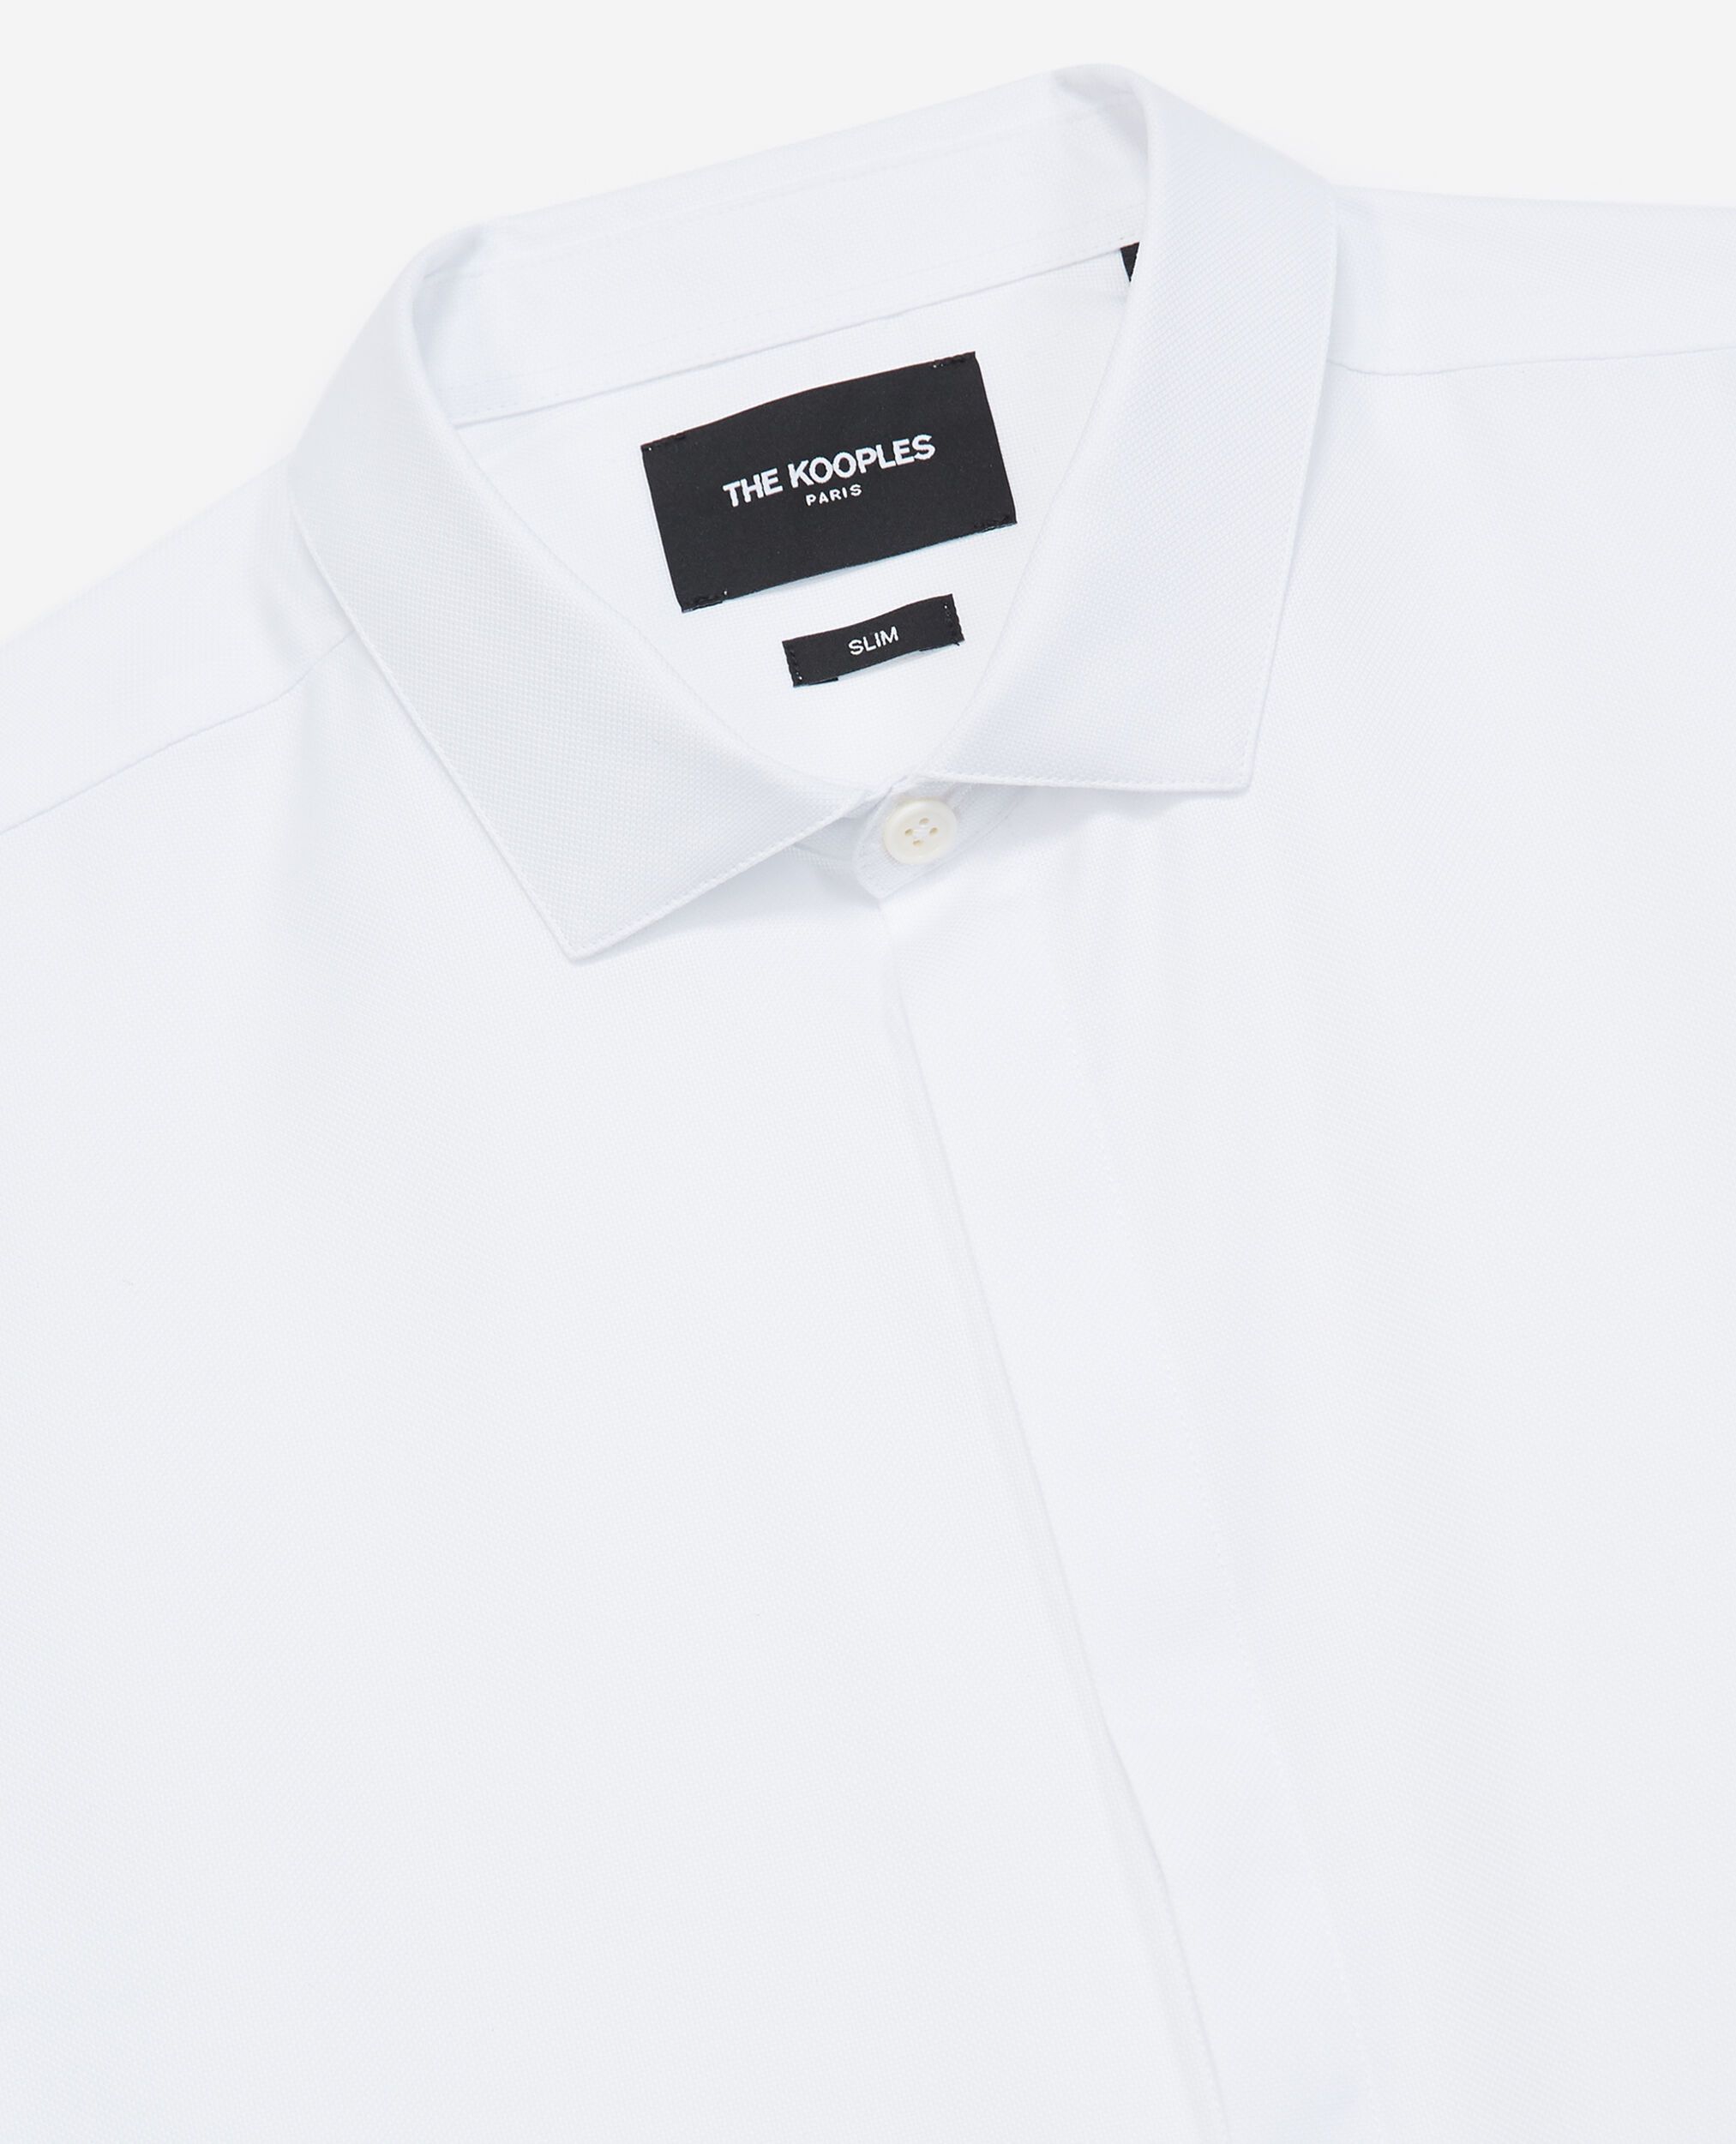 Chemise chic blanche coton à col italien, WHITE, hi-res image number null